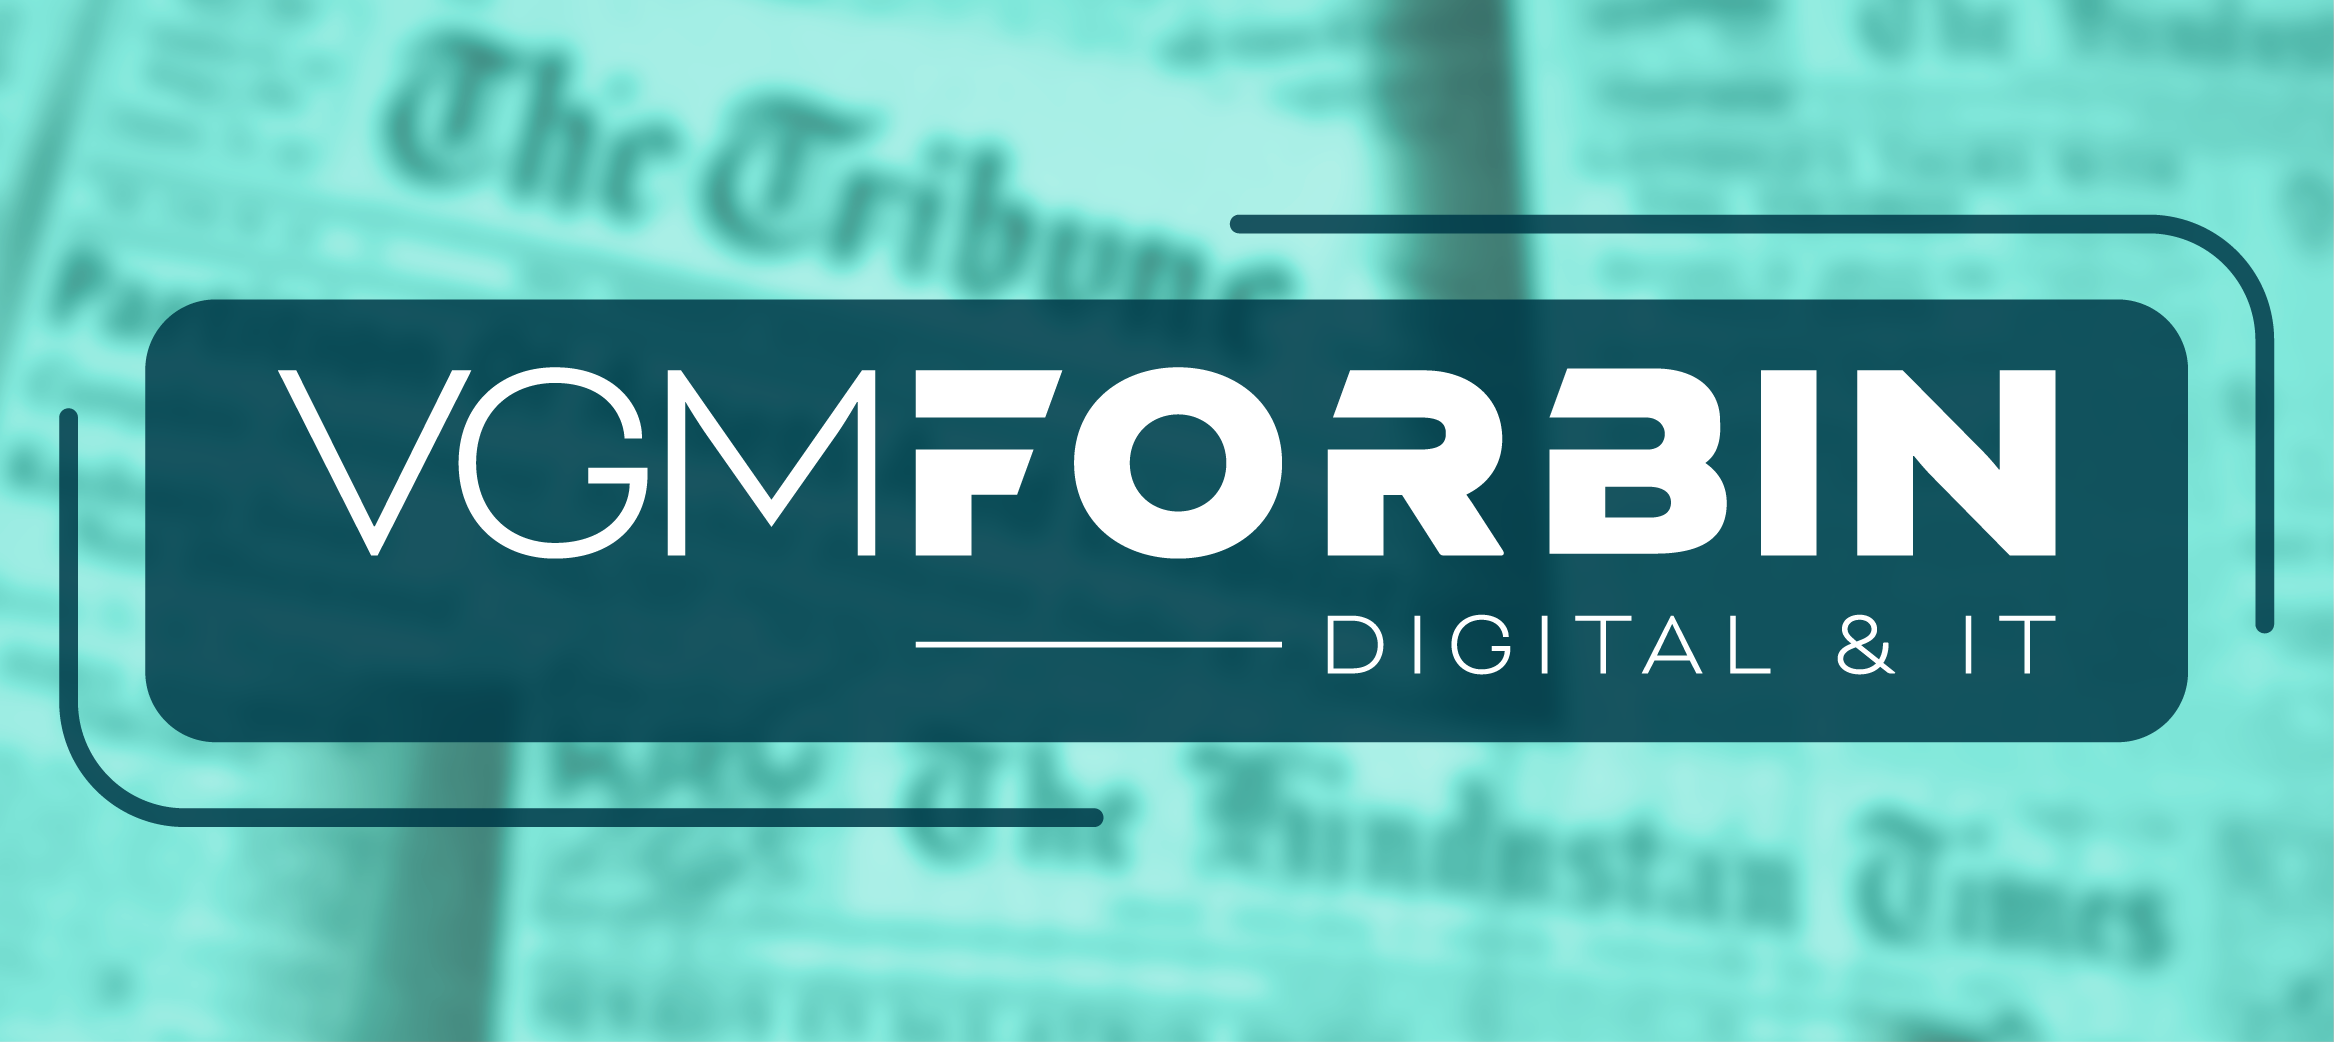 VGM Forbin Launches A Refreshed Brand 